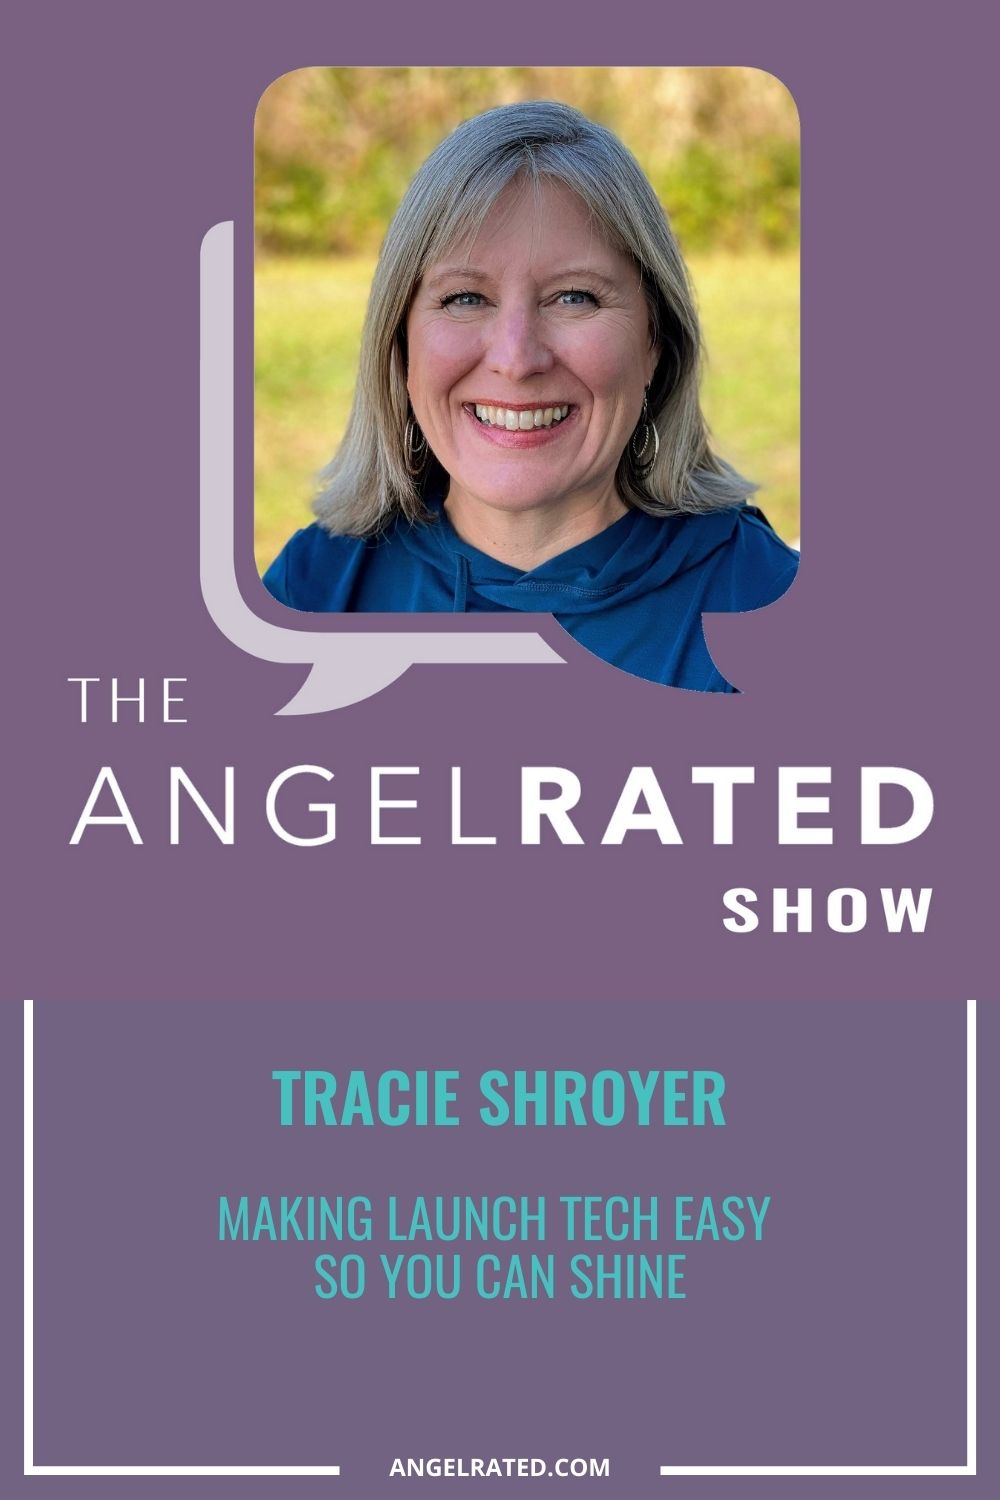 Tracie Shroyer: Making launch tech easy so you can shine